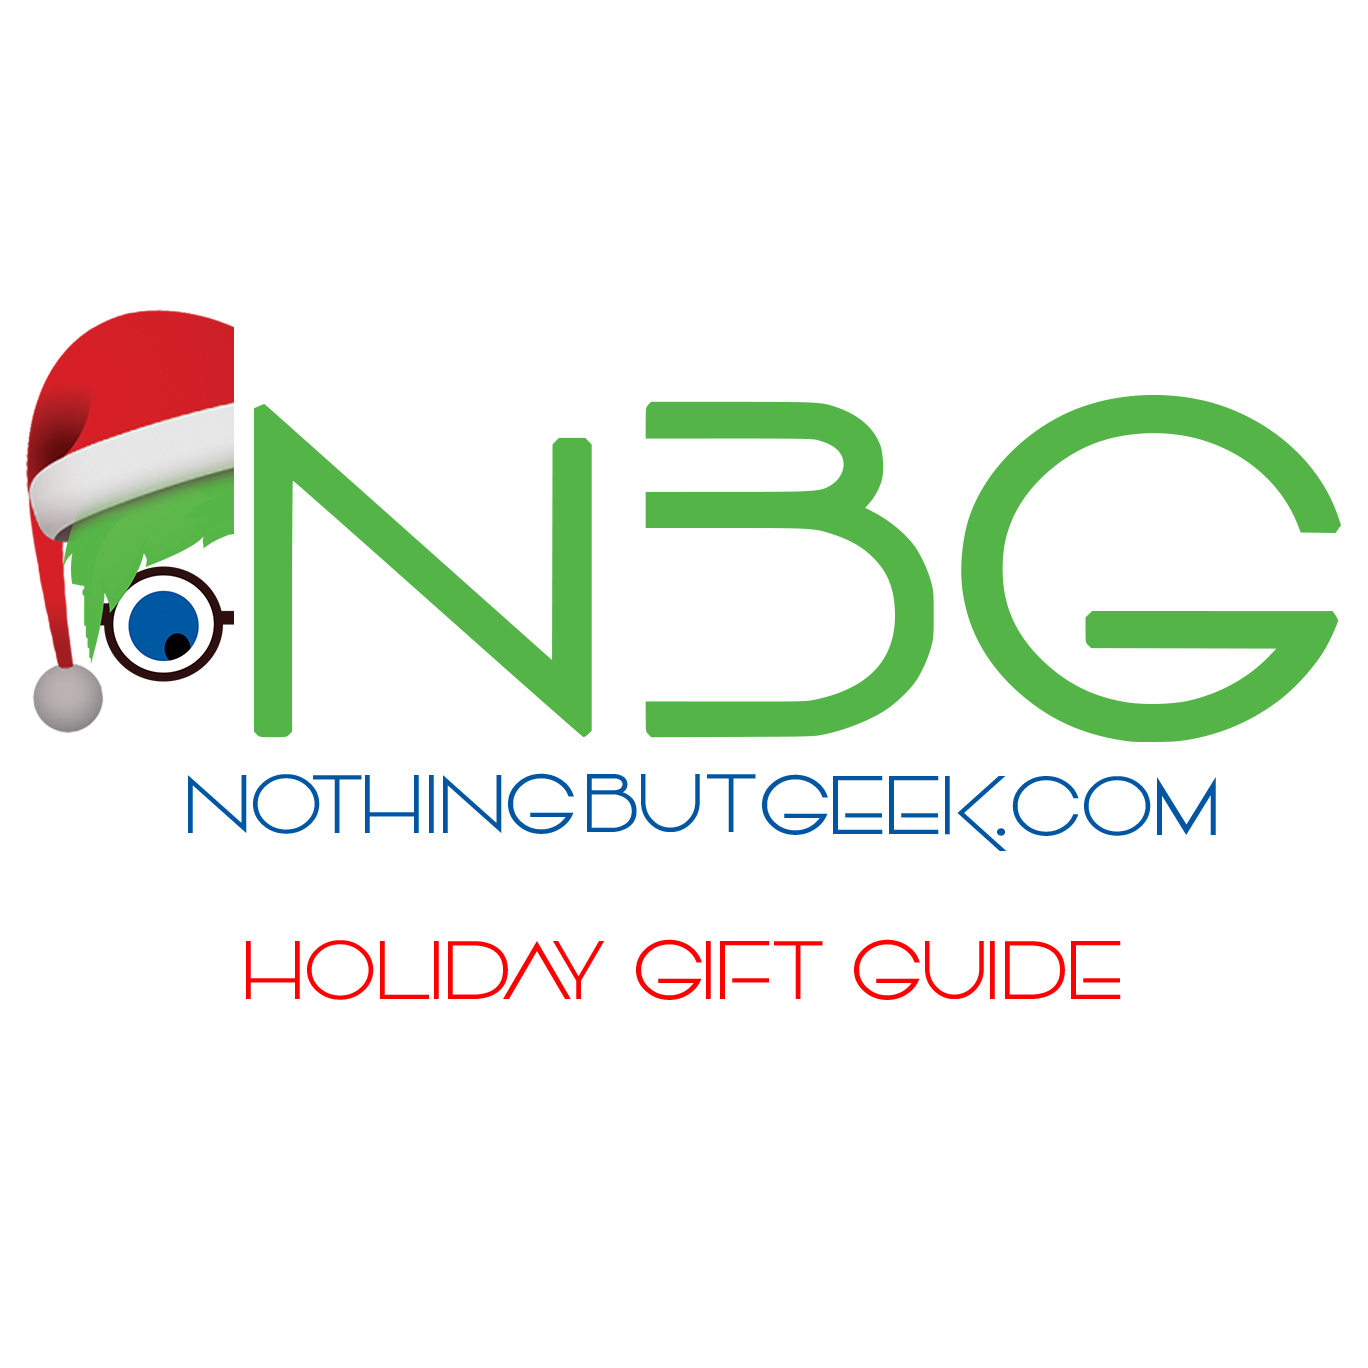 Nothing But Geek Holiday Gift Guide logo